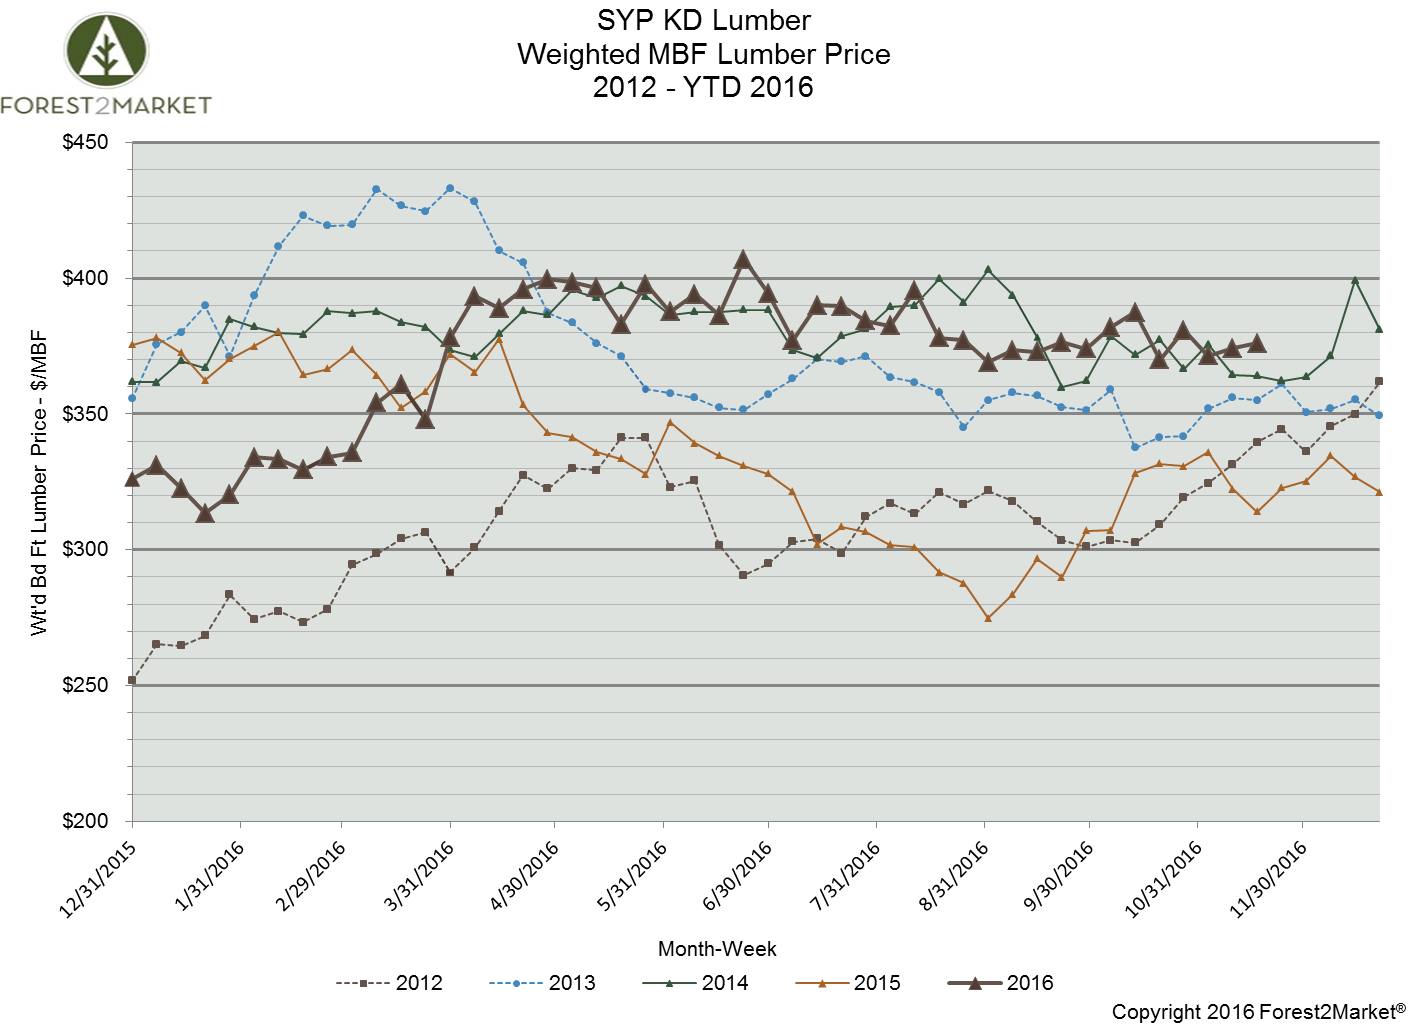 Southern Yellow Pine Lumber: Quarterly and YTD Prices